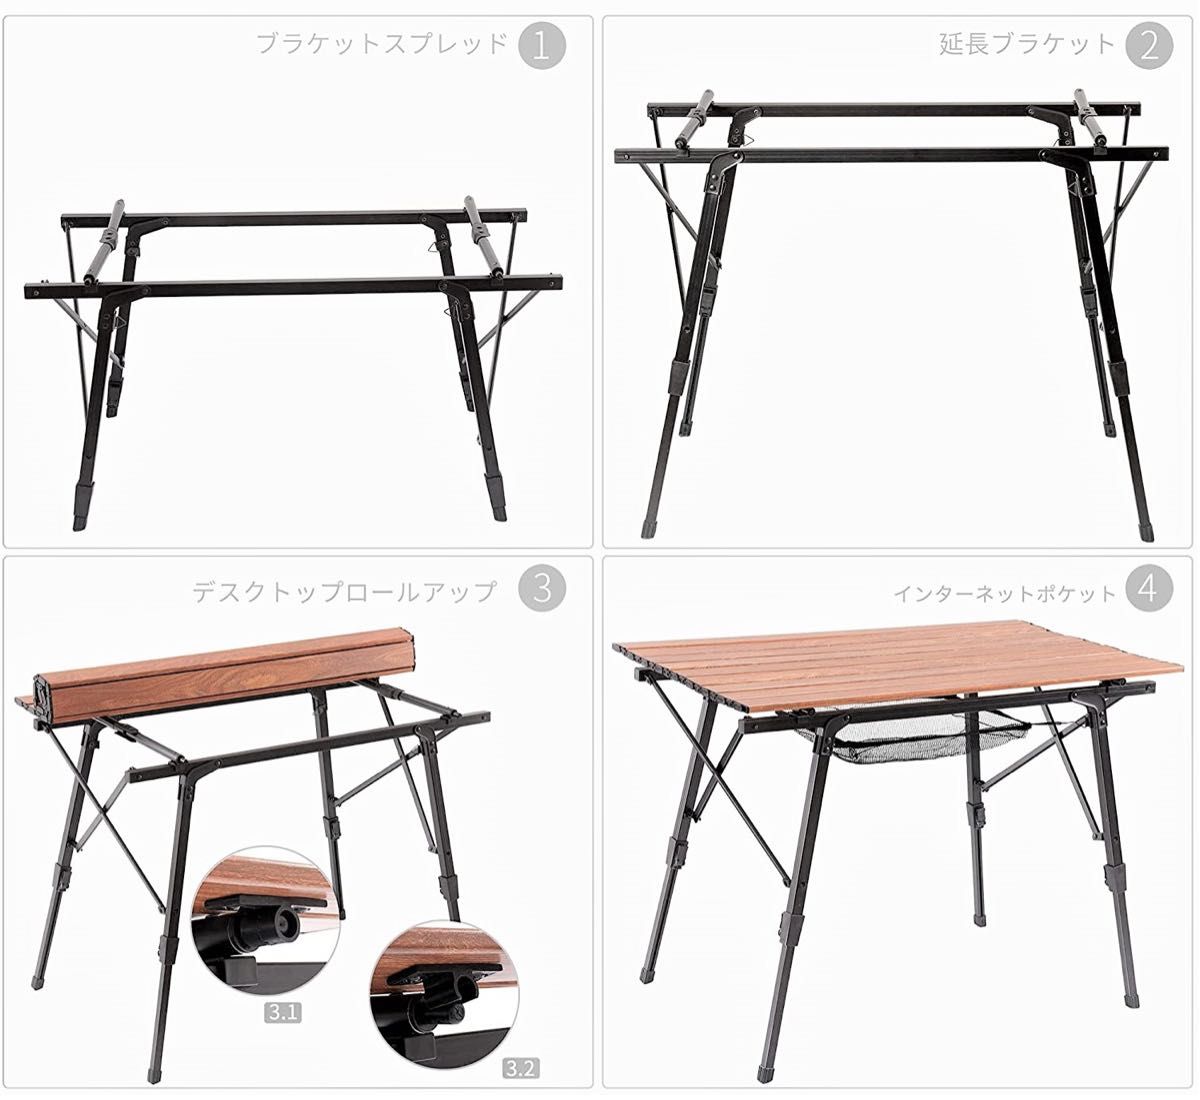 CHANODUG OUTDOOR 木目調 HIGH＆MIDDLE＆LOW ３WAYアルミロールテーブル　４５cmから６５cm変更可